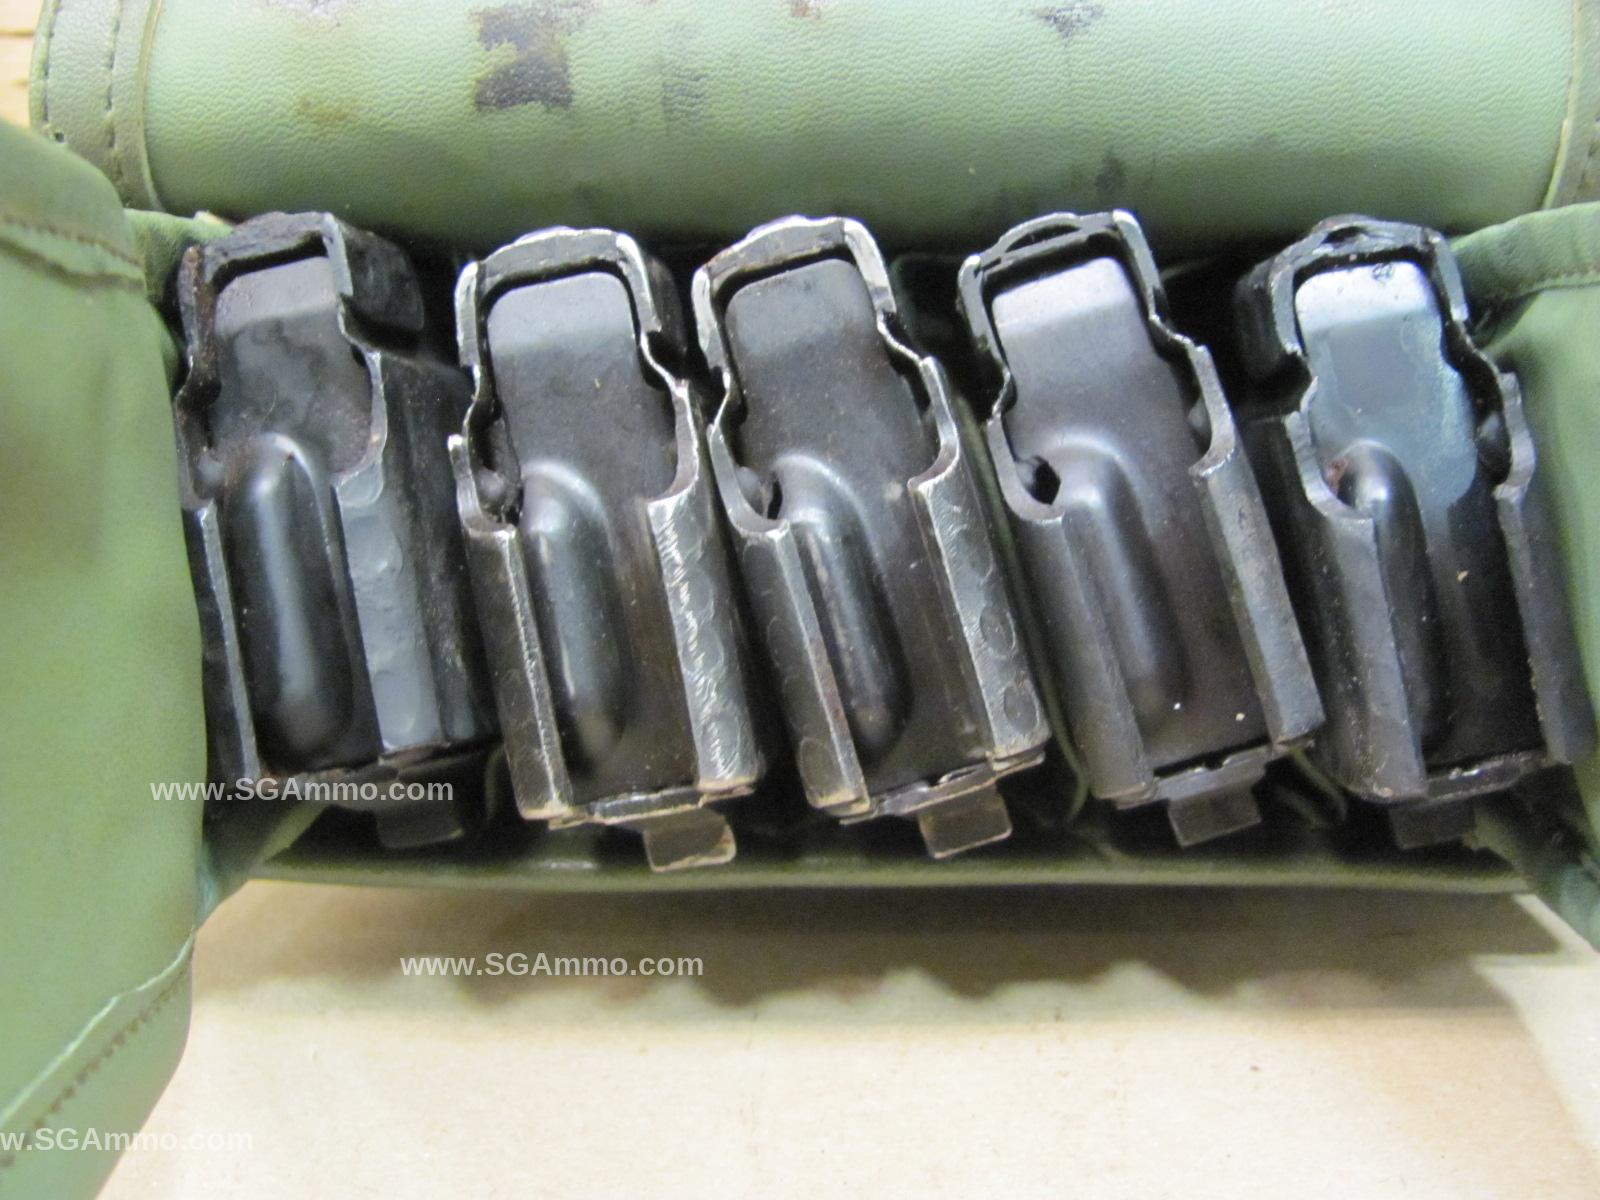 5 x 30 Round AK-47 Mags in Vinyl Pouch - Used Condition Fair to Excellent - Sold AS-IS - Hungarian Military Surplus Steel Magazines